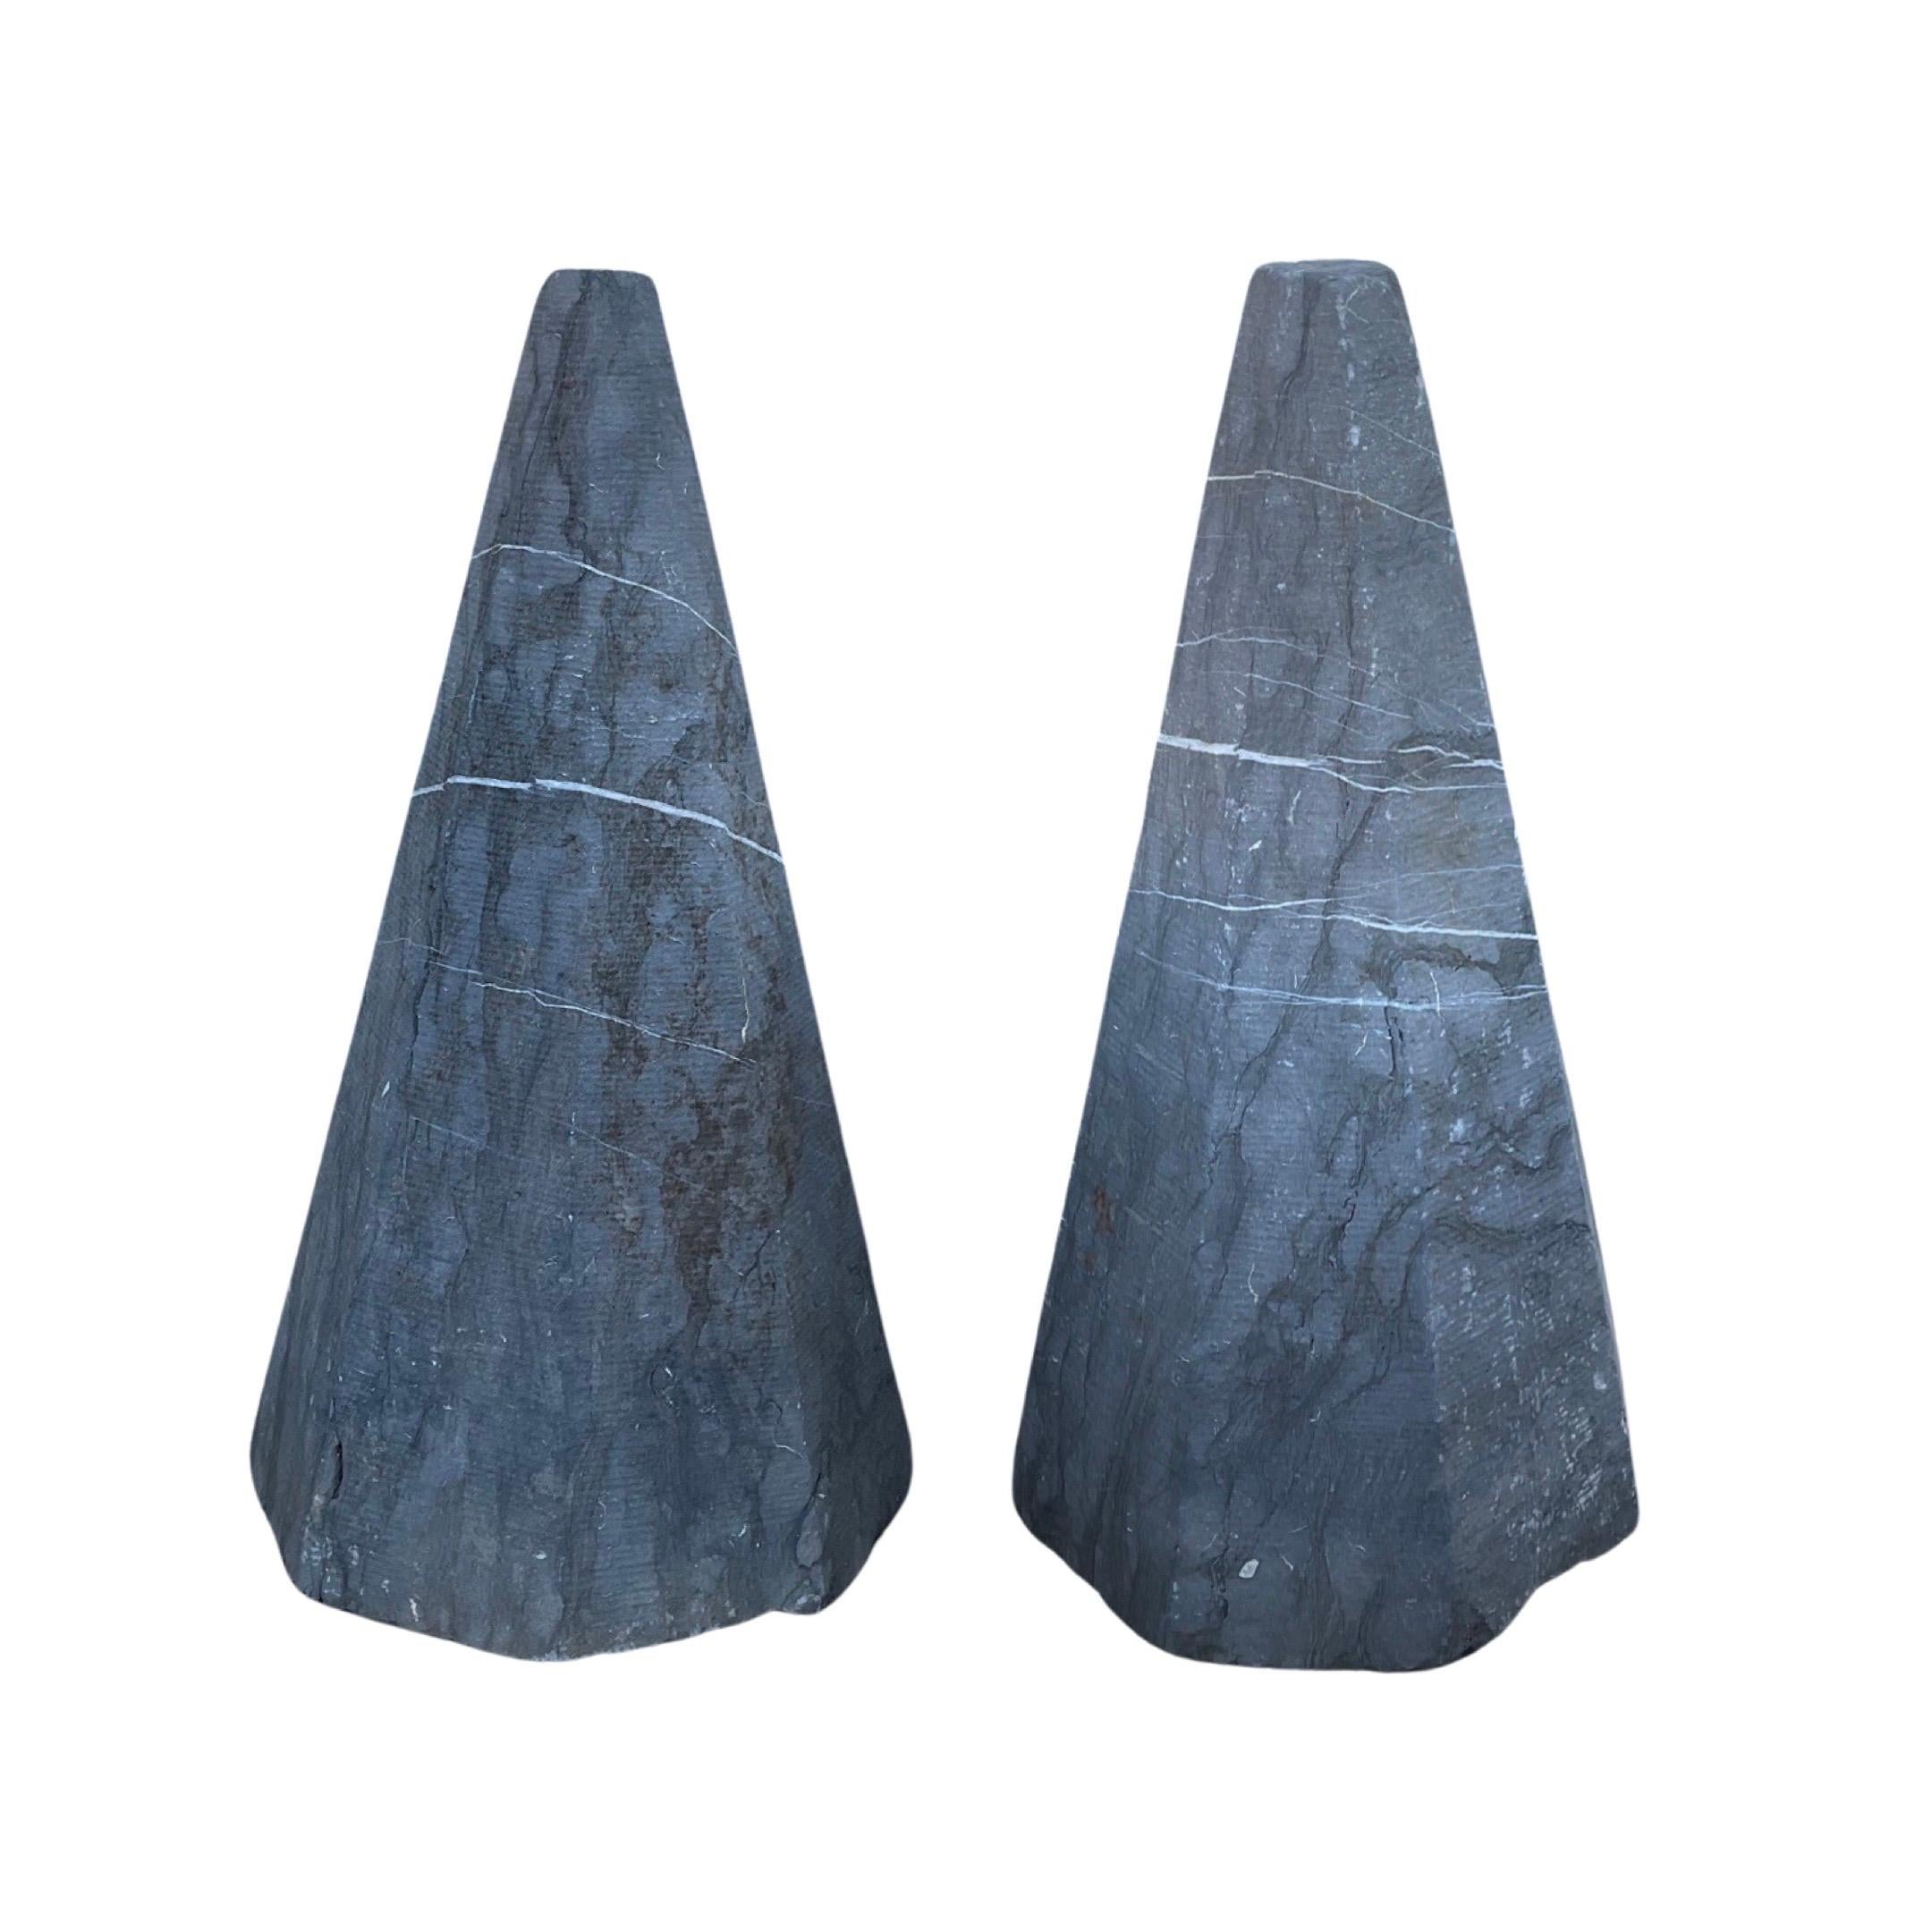 These 18th-century cone sculptures are made from premium Belgium bluestone and are ideal for enhancing any indoor or outdoor design project. Their unique shape provides a striking visual element to add an element of elegance to any space. 